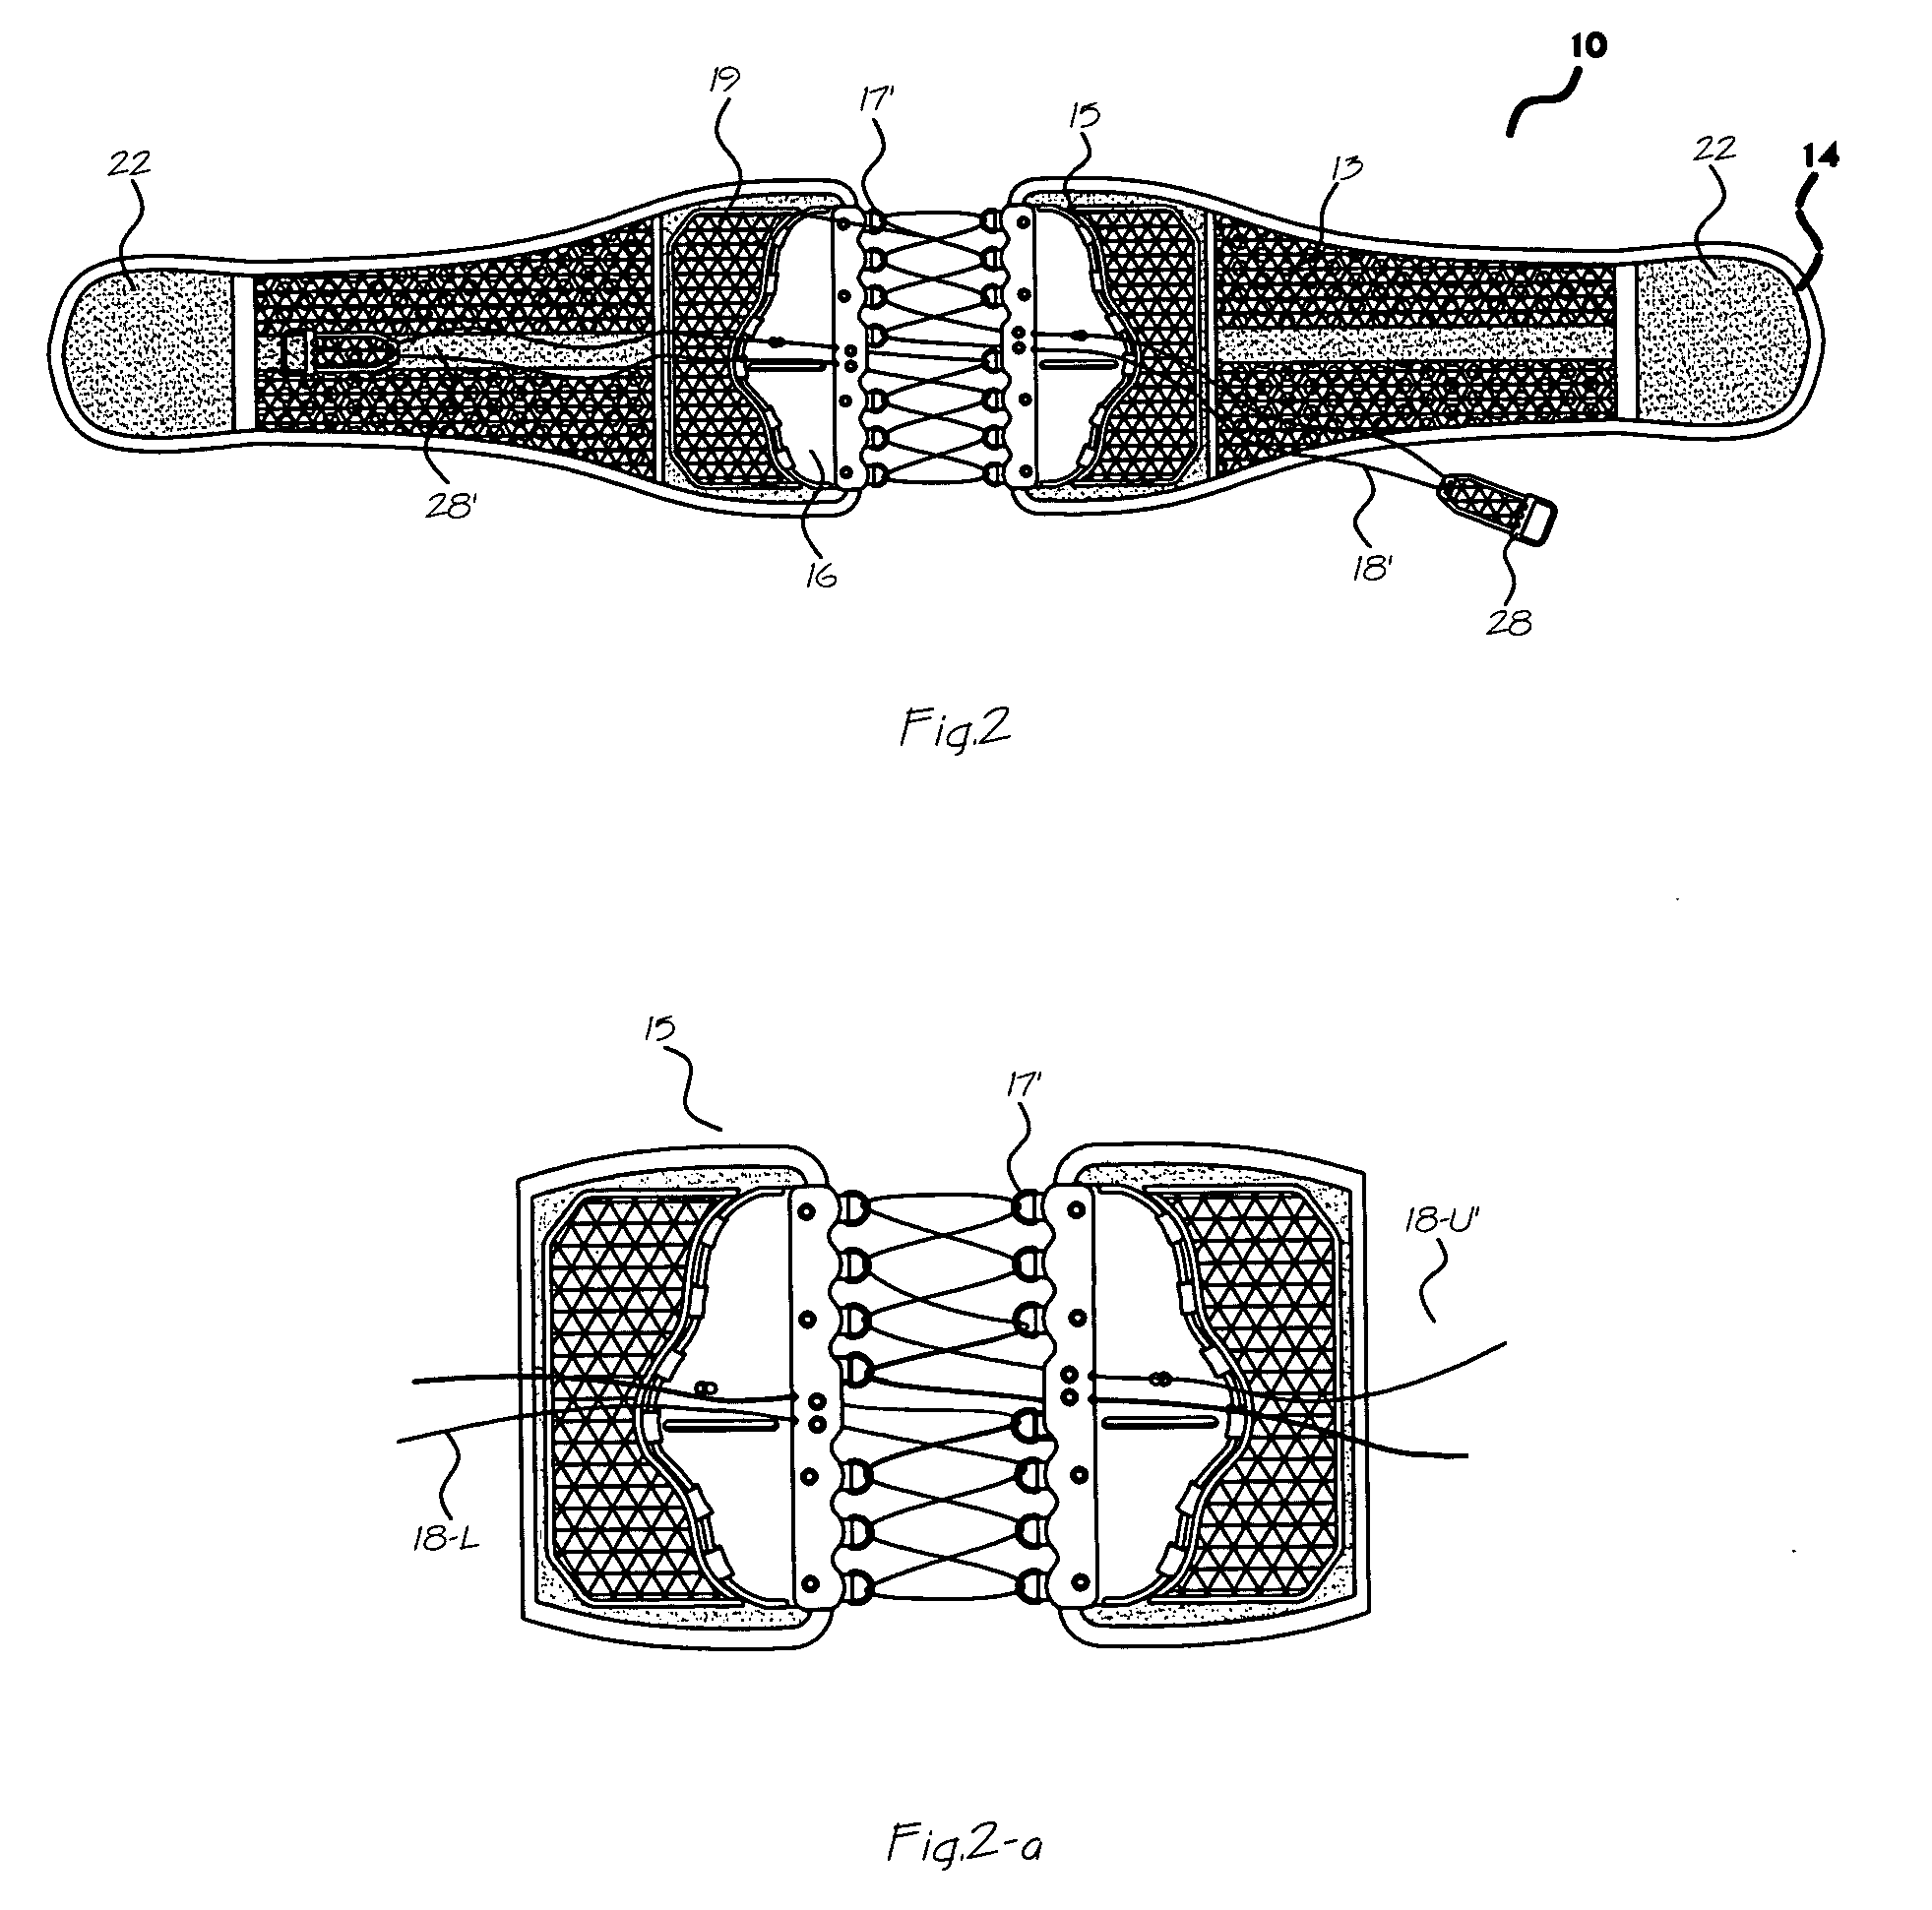 String arrangement of a separate back immobilizing, dynamically self-adjusting, customizing back support for a vertebra related patient